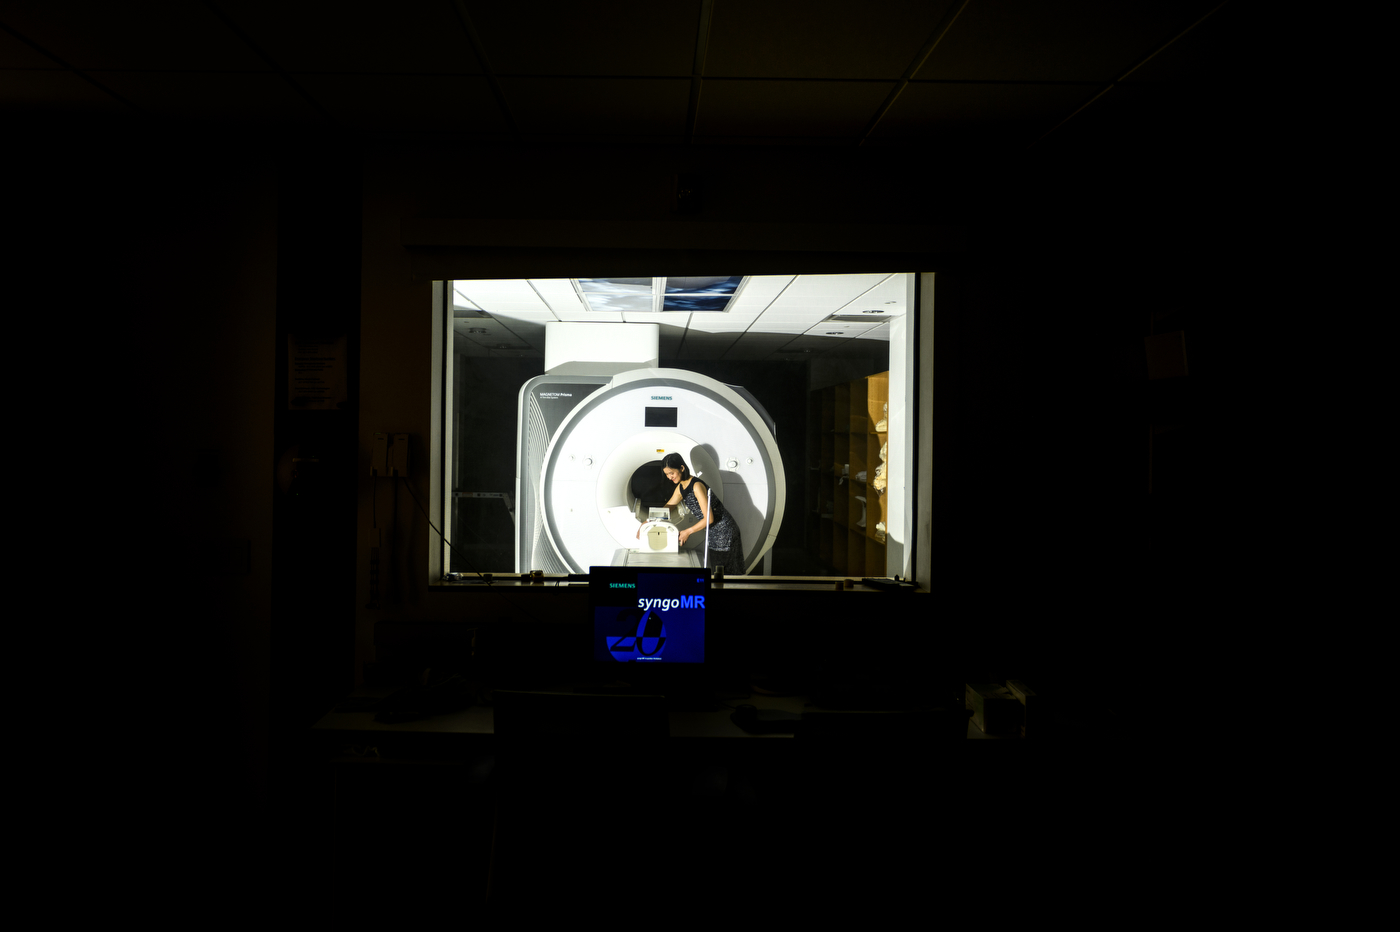 Zhenghan Qi working on research in an MRI lab